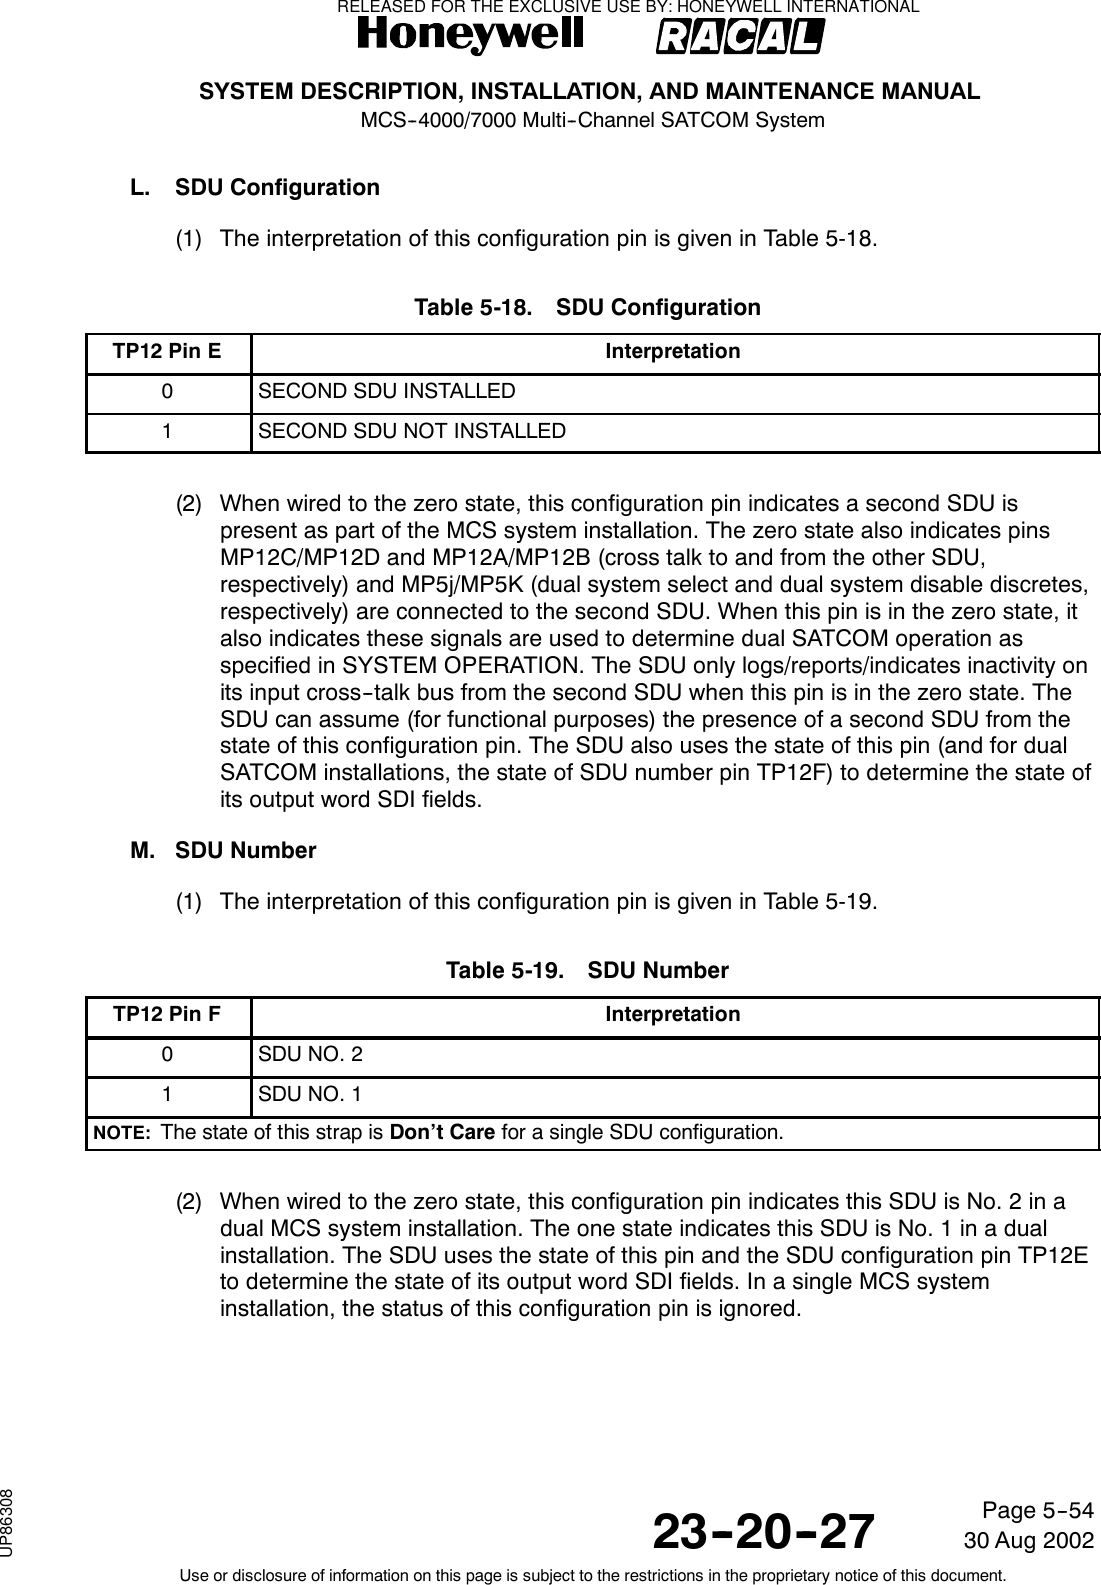 SYSTEM DESCRIPTION, INSTALLATION, AND MAINTENANCE MANUALMCS--4000/7000 Multi--Channel SATCOM System23--20--2730 Aug 2002Use or disclosure of information on this page is subject to the restrictions in the proprietary notice of this document.Page 5--54L. SDU Configuration(1) The interpretation of this configuration pin is given in Table 5-18.Table 5-18. SDU ConfigurationTP12 Pin E Interpretation0SECOND SDU INSTALLED1SECOND SDU NOT INSTALLED(2) When wired to the zero state, this configuration pin indicates a second SDU ispresent as part of the MCS system installation. The zero state also indicates pinsMP12C/MP12D and MP12A/MP12B (cross talk to and from the other SDU,respectively) and MP5j/MP5K (dual system select and dual system disable discretes,respectively) are connected to the second SDU. When this pin is in the zero state, italso indicates these signals are used to determine dual SATCOM operation asspecified in SYSTEM OPERATION. The SDU only logs/reports/indicates inactivity onits input cross--talk bus from the second SDU when this pin is in the zero state. TheSDU can assume (for functional purposes) the presence of a second SDU from thestate of this configuration pin. The SDU also uses the state of this pin (and for dualSATCOM installations, the state of SDU number pin TP12F) to determine the state ofits output word SDI fields.M. SDU Number(1) The interpretation of this configuration pin is given in Table 5-19.Table 5-19. SDU NumberTP12 Pin F Interpretation0SDU NO. 21SDU NO. 1NOTE: The state of this strap is Don’t Care for a single SDU configuration.(2) When wired to the zero state, this configuration pin indicates this SDU is No. 2 in adual MCS system installation. The one state indicates this SDU is No. 1 in a dualinstallation. The SDU uses the state of this pin and the SDU configuration pin TP12Eto determine the state of its output word SDI fields. In a single MCS systeminstallation, the status of this configuration pin is ignored.RELEASED FOR THE EXCLUSIVE USE BY: HONEYWELL INTERNATIONALUP86308